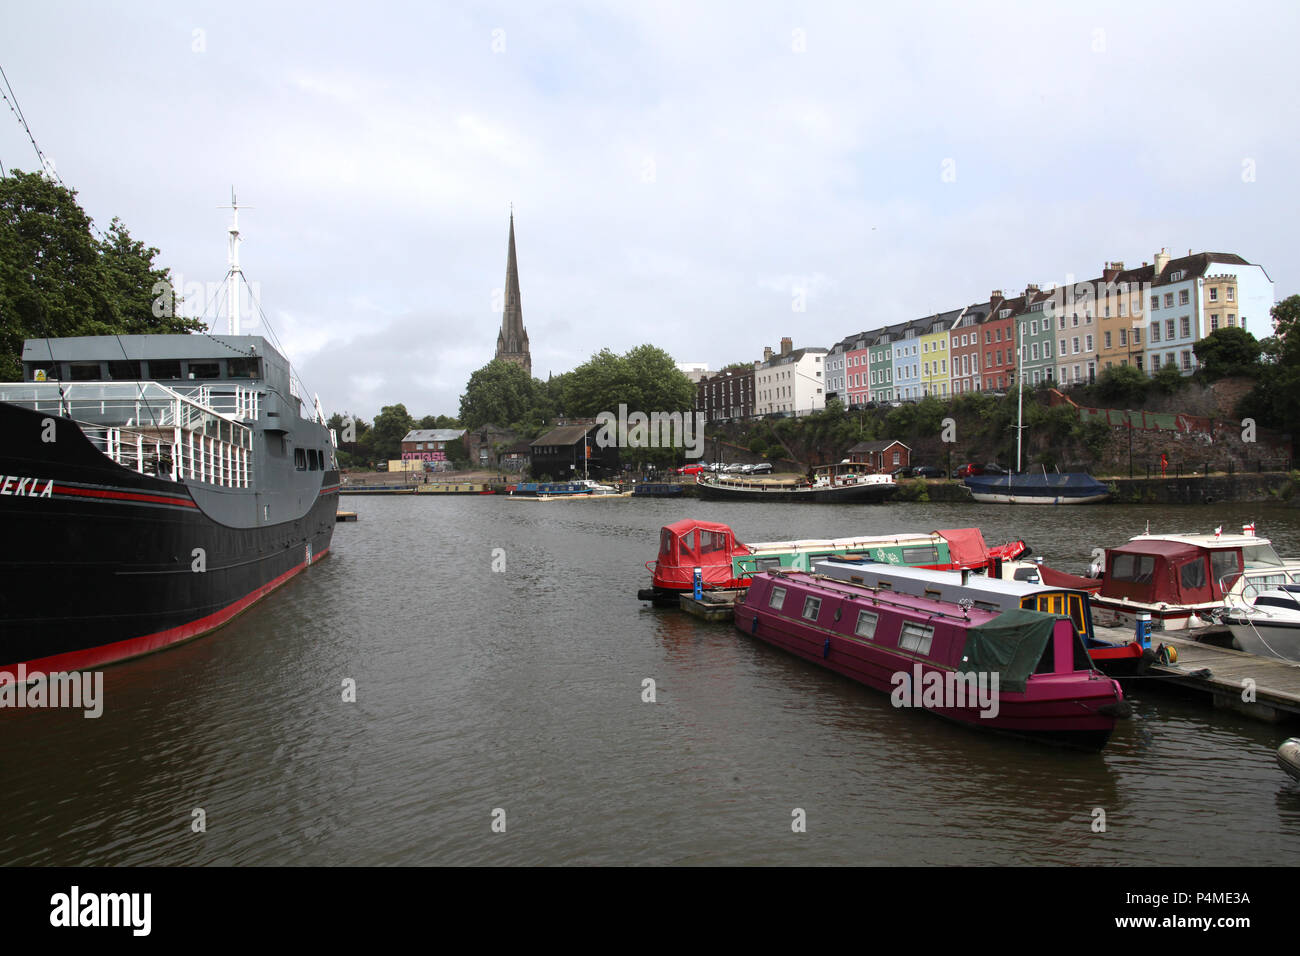 A view of The River Avon from Prince Street, Bristol, England. Stock Photo